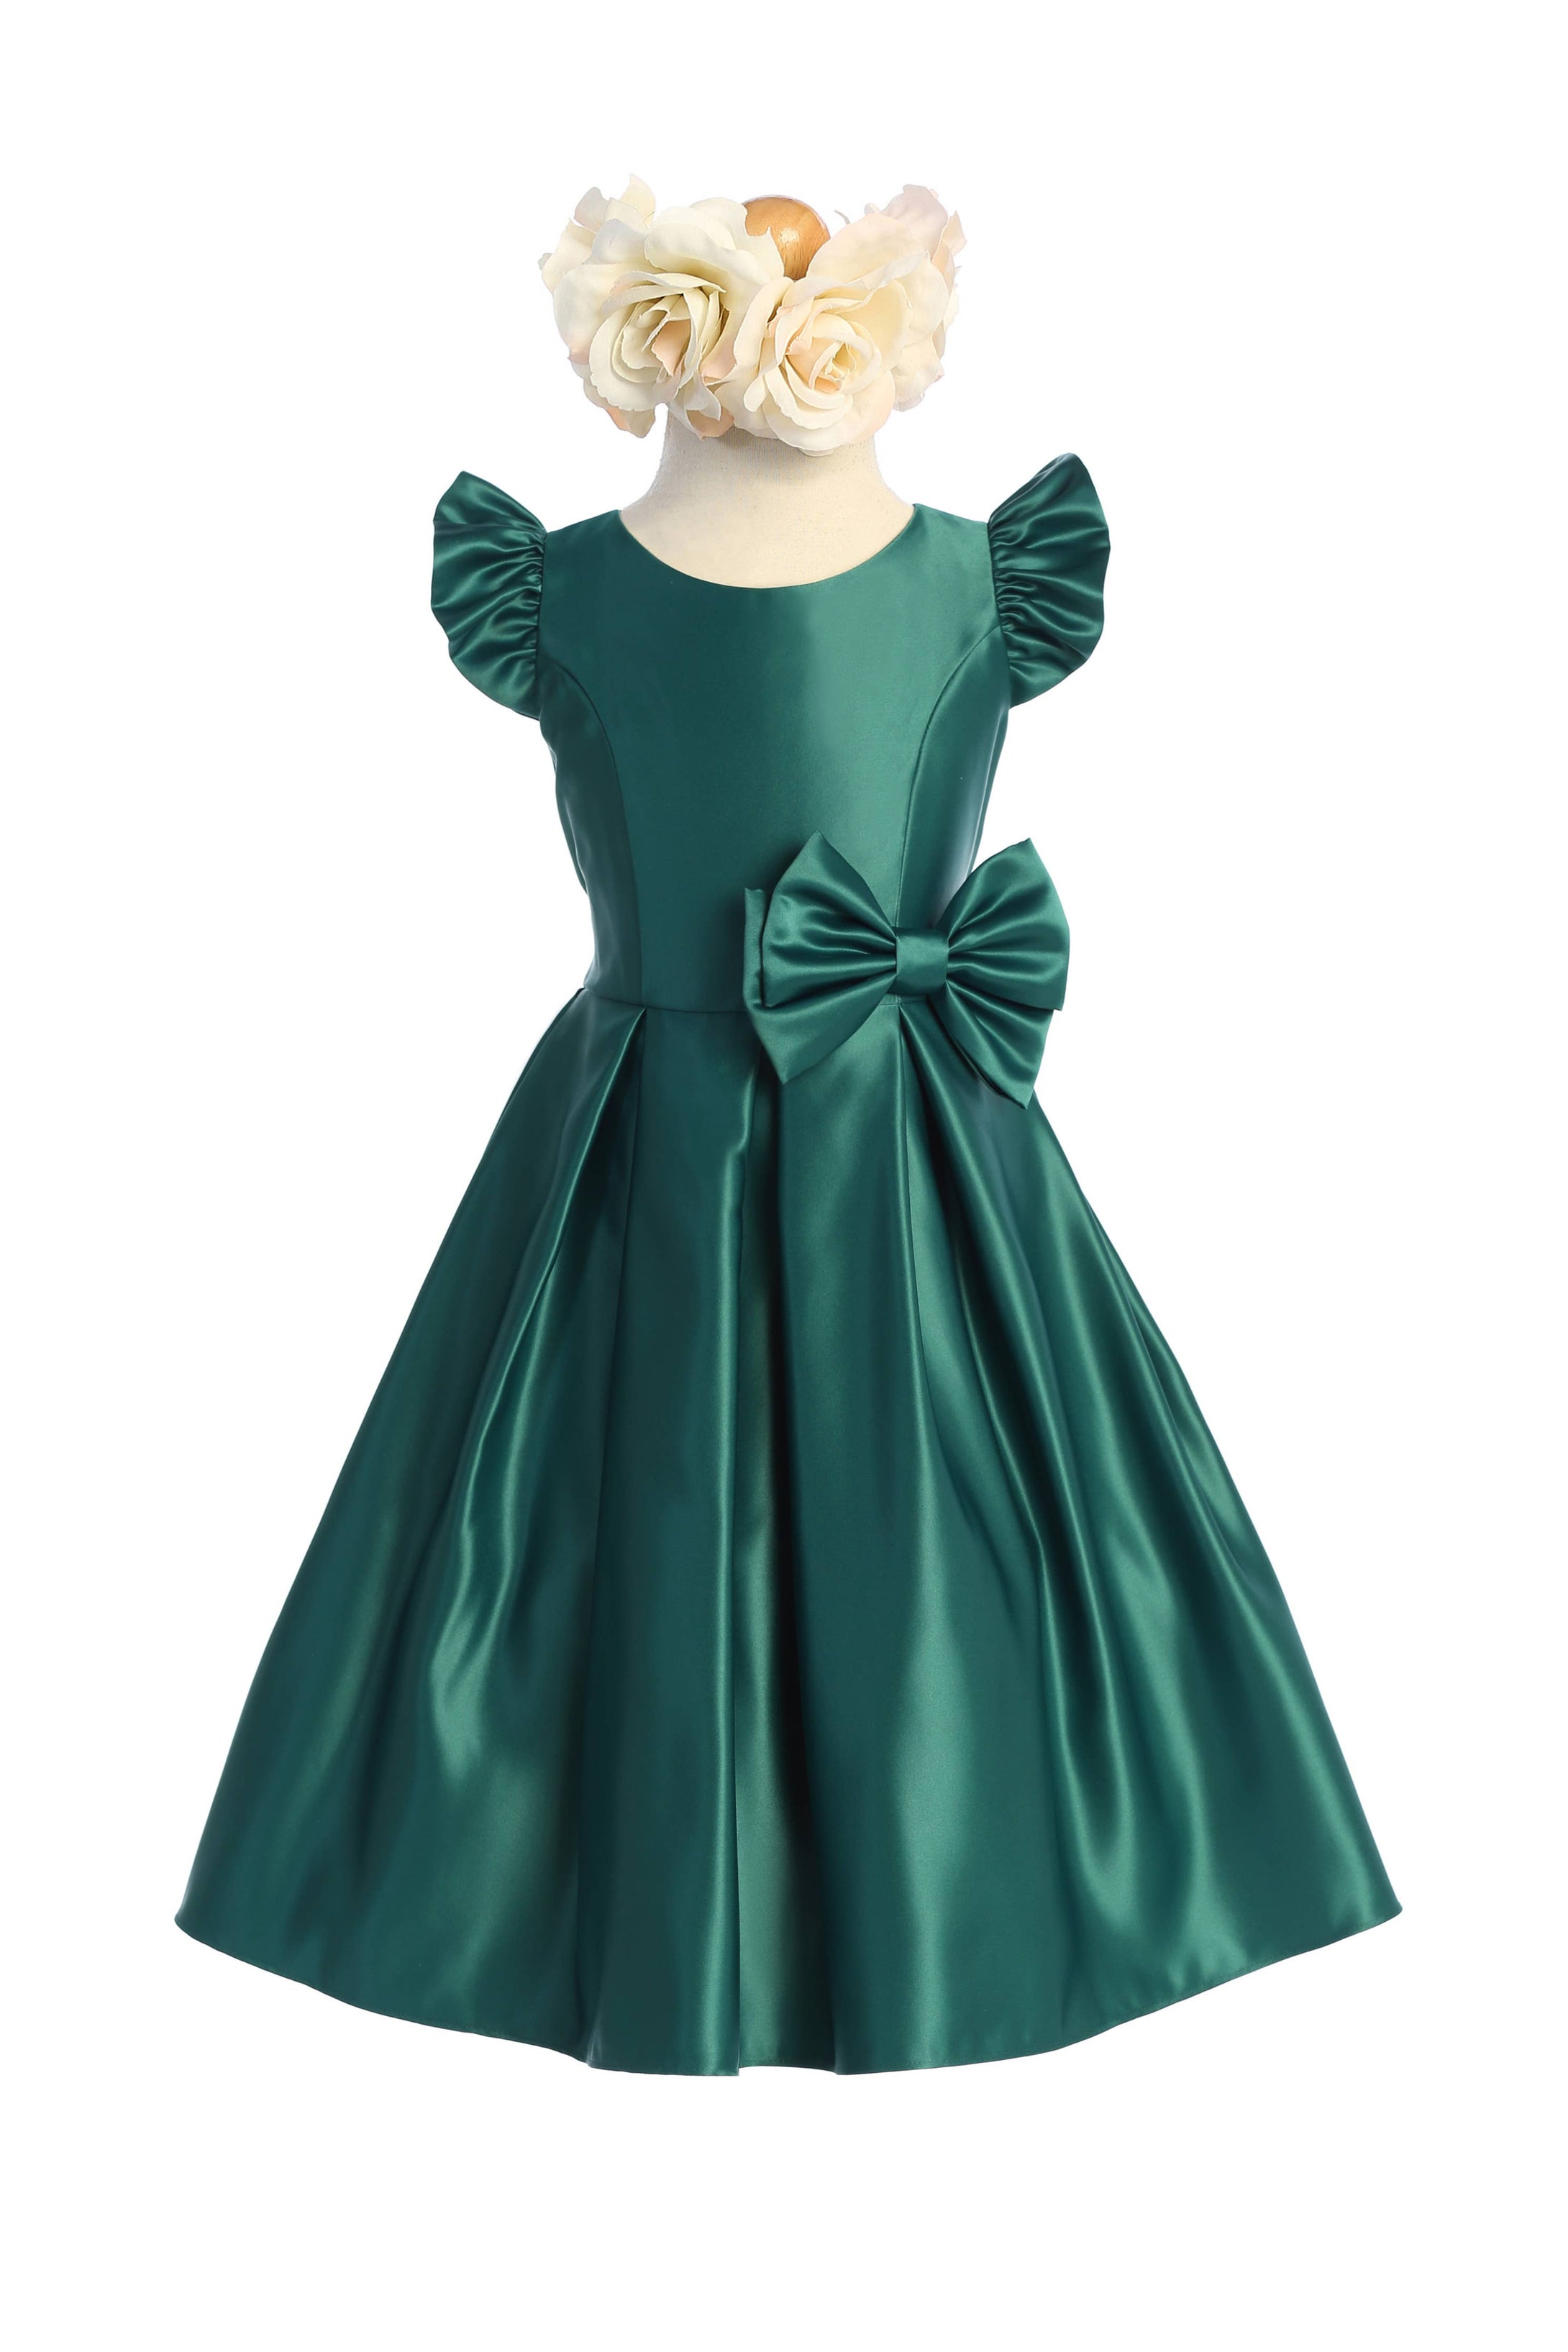 SK930 - satin pleated flutter sleeve with bow detail